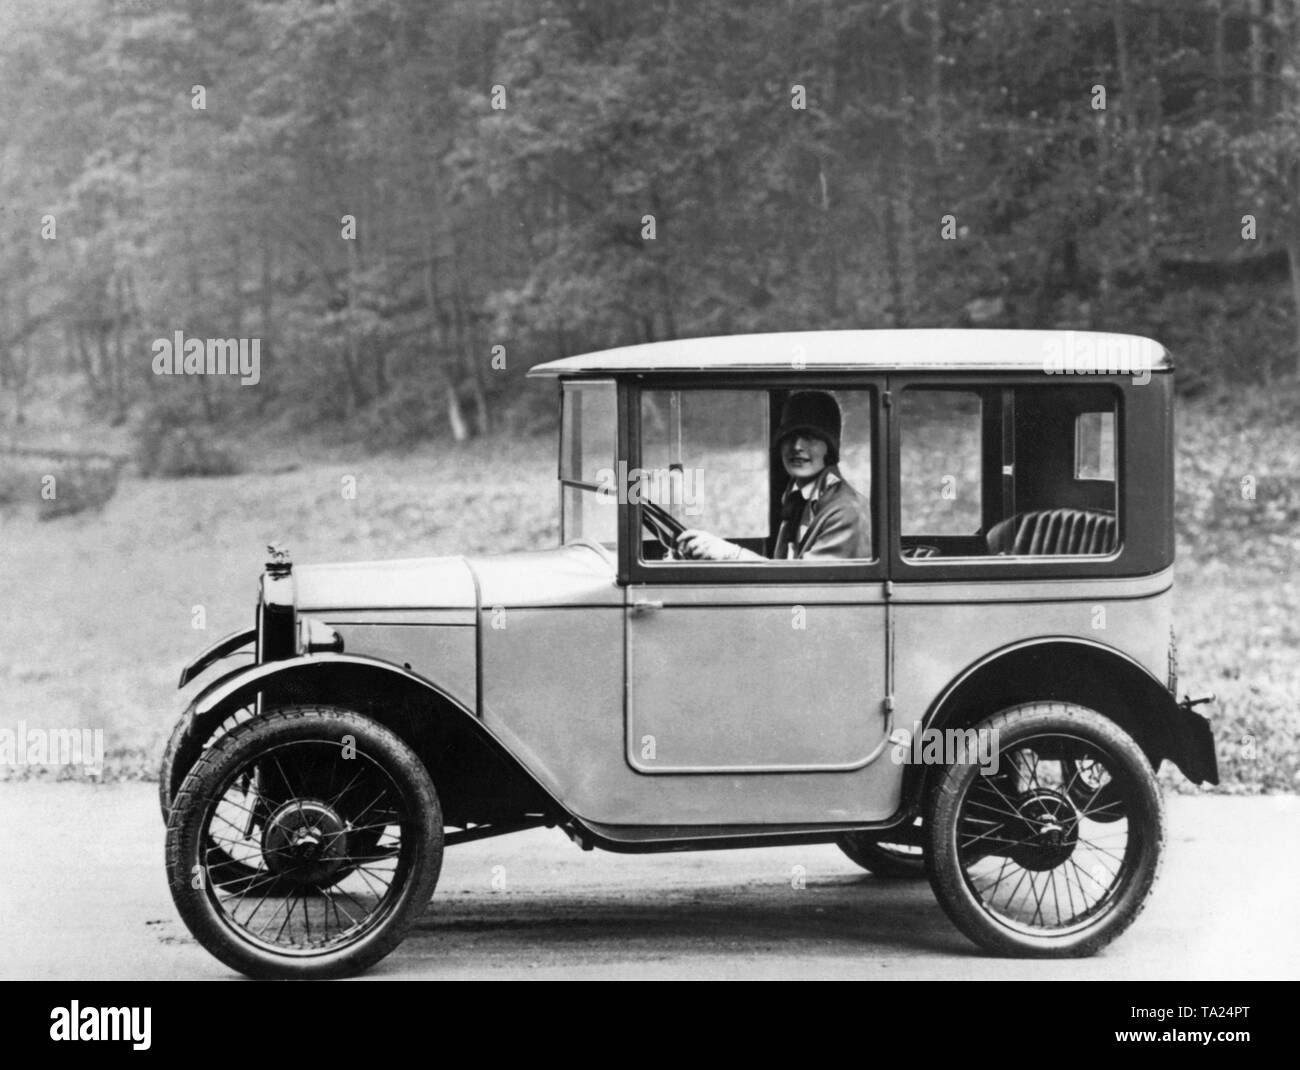 The Dixi 3/15 was a licensed construction of the English Austin 7. Later the company Dixi was taken over by BMW. Stock Photo